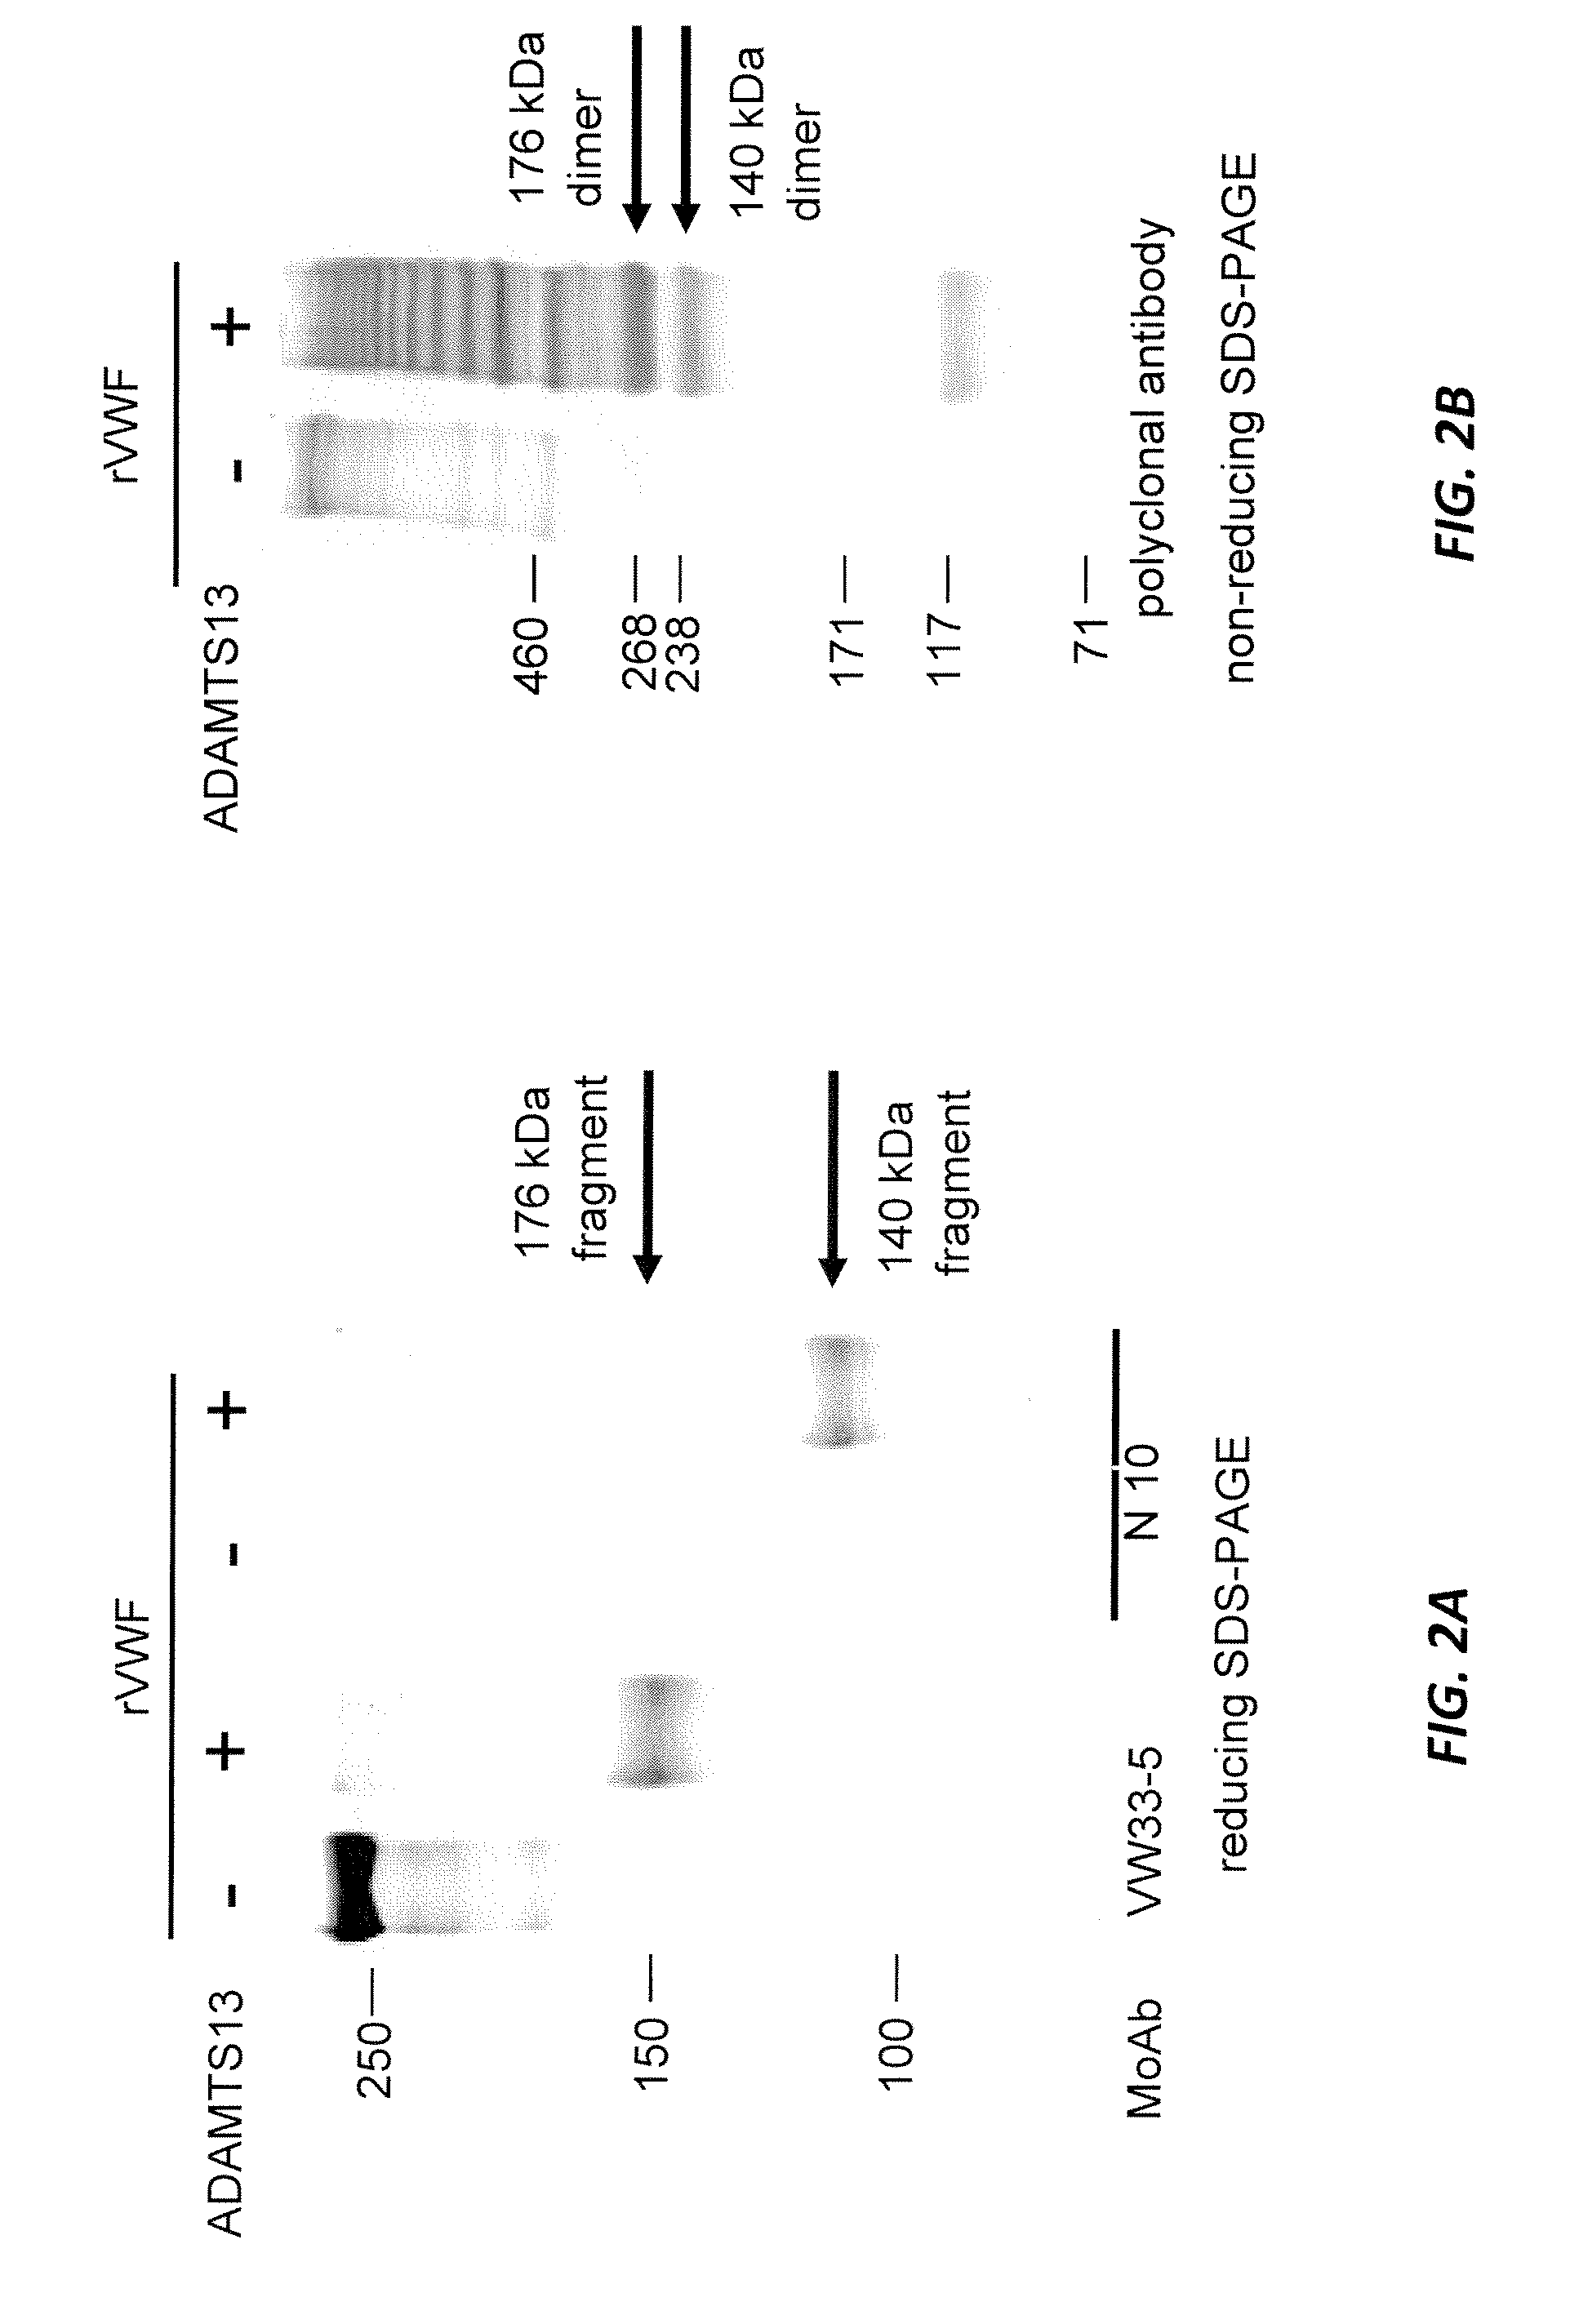 Methods of measuring ADAMTS13-mediated in vivo cleavage of von Willebrand factor and uses thereof